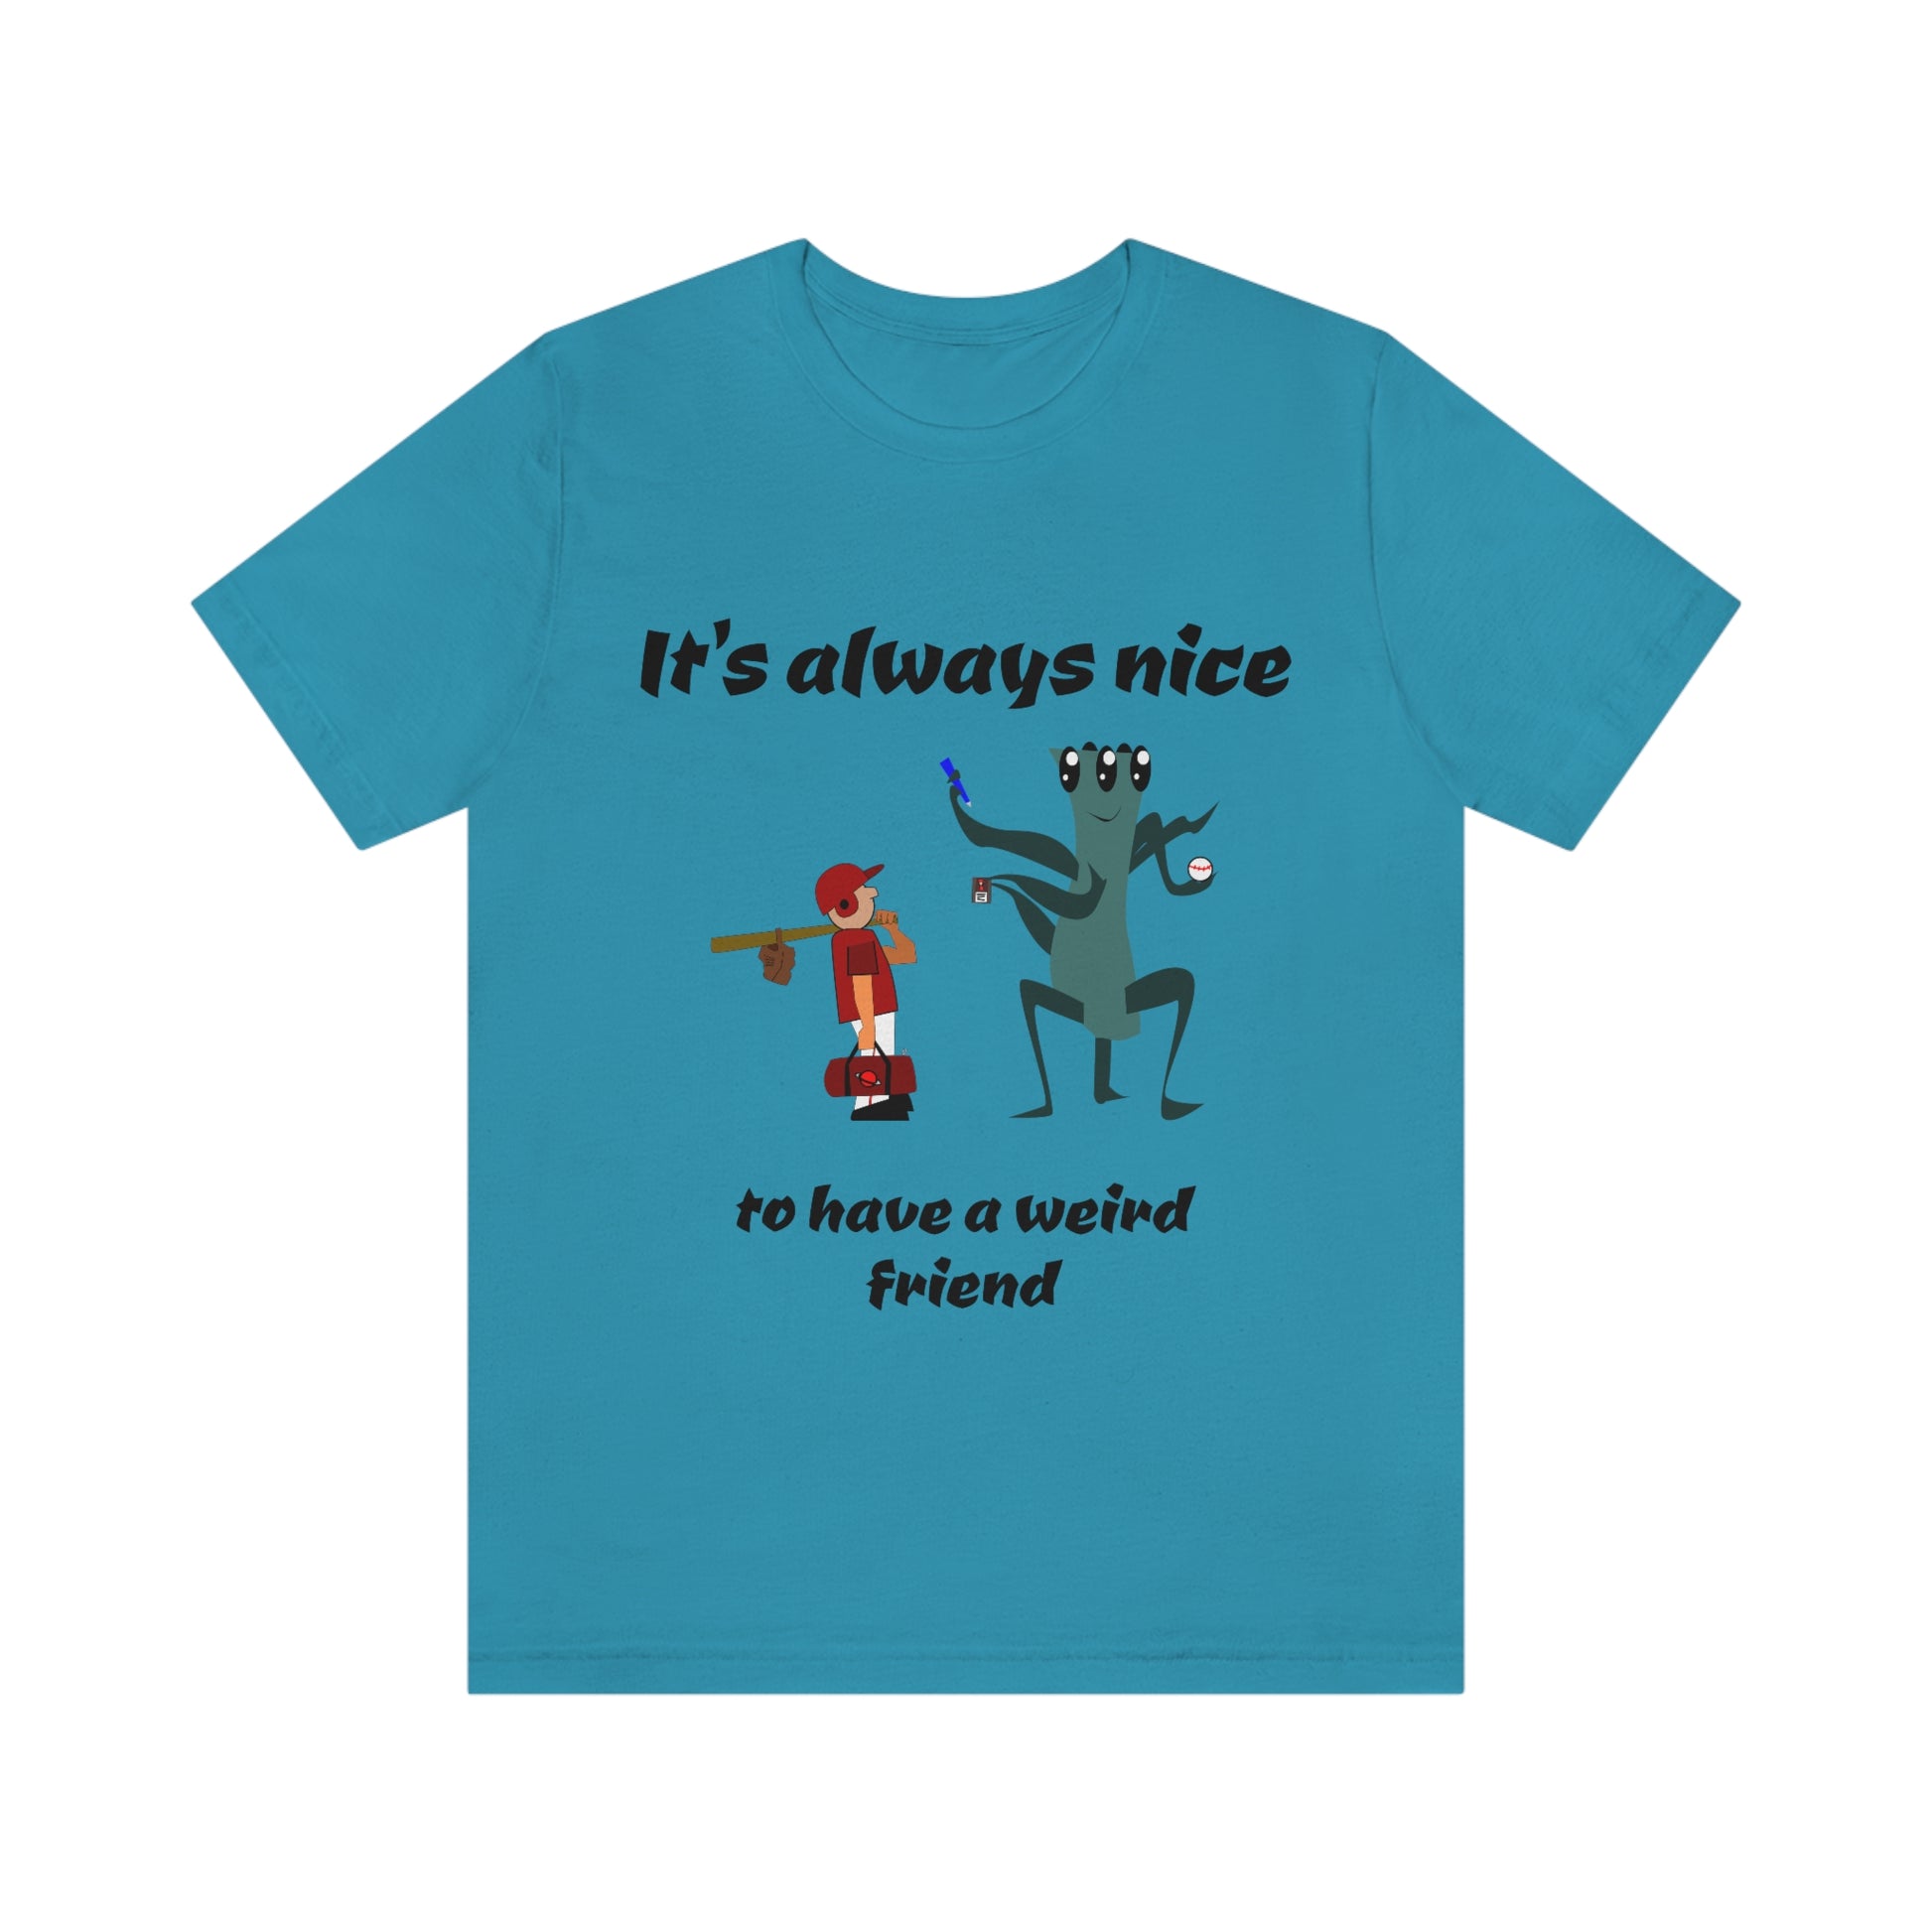 It's always nice to have a weird friend - Funny - Unisex Short Sleeve Tee - CrazyTomTShirts